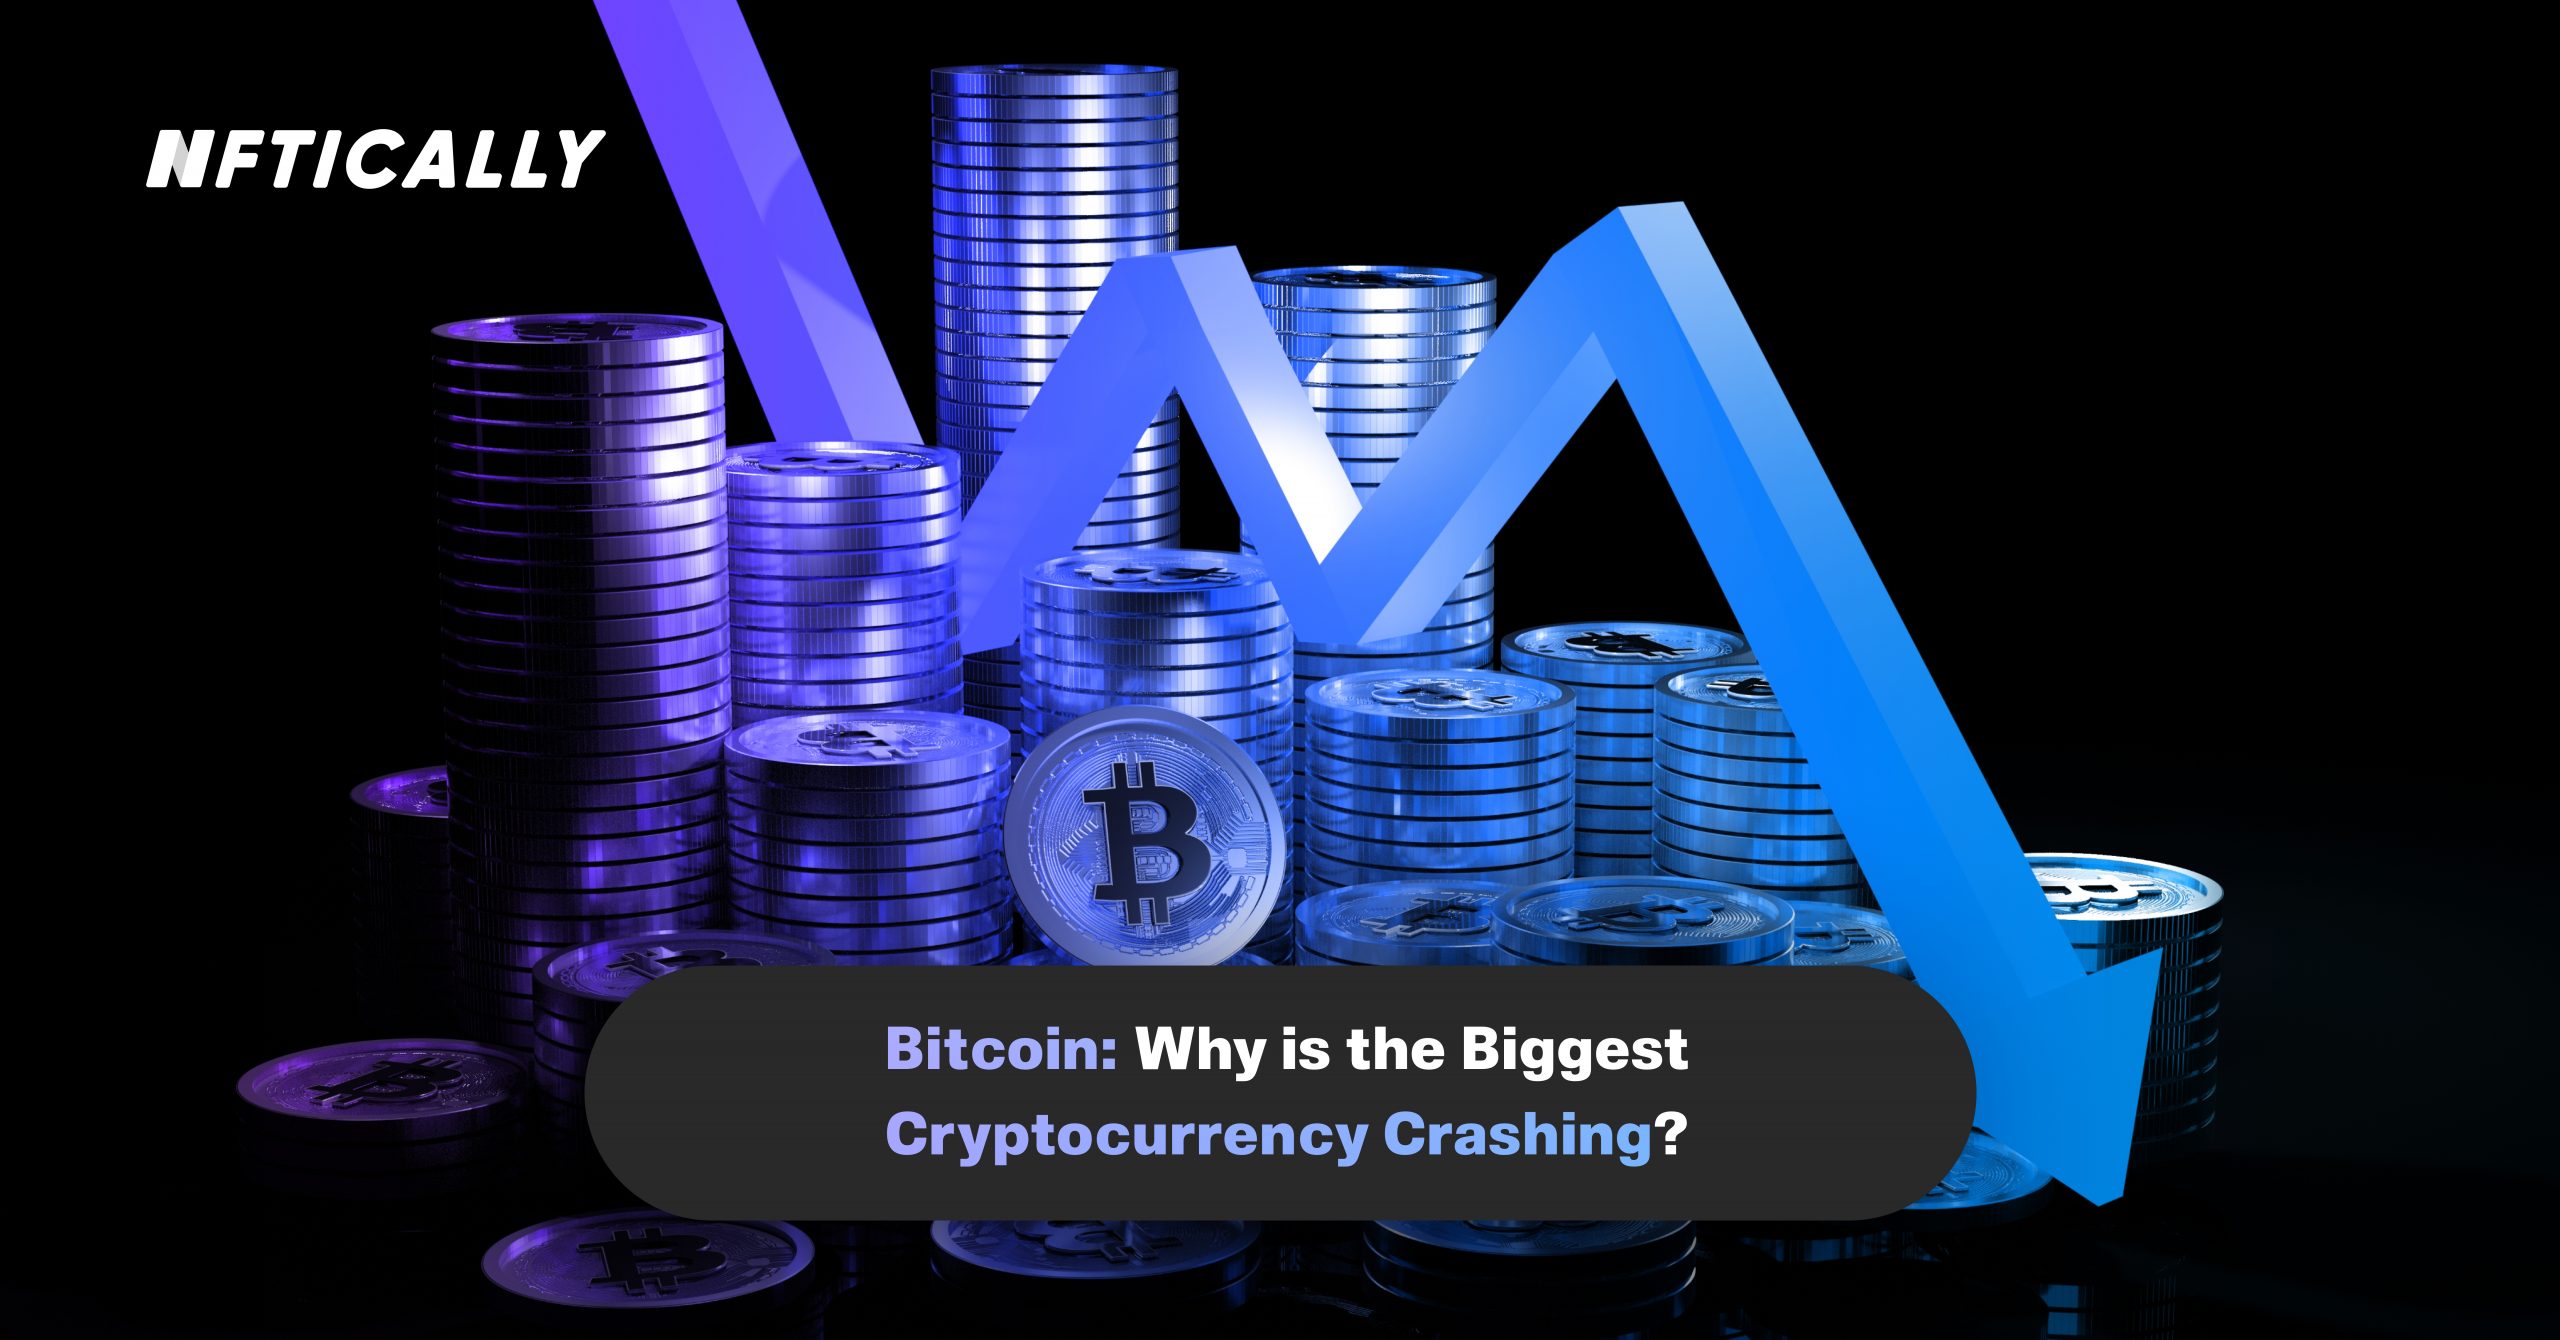  Bitcoin: Why is the Biggest Cryptocurrency Crashing